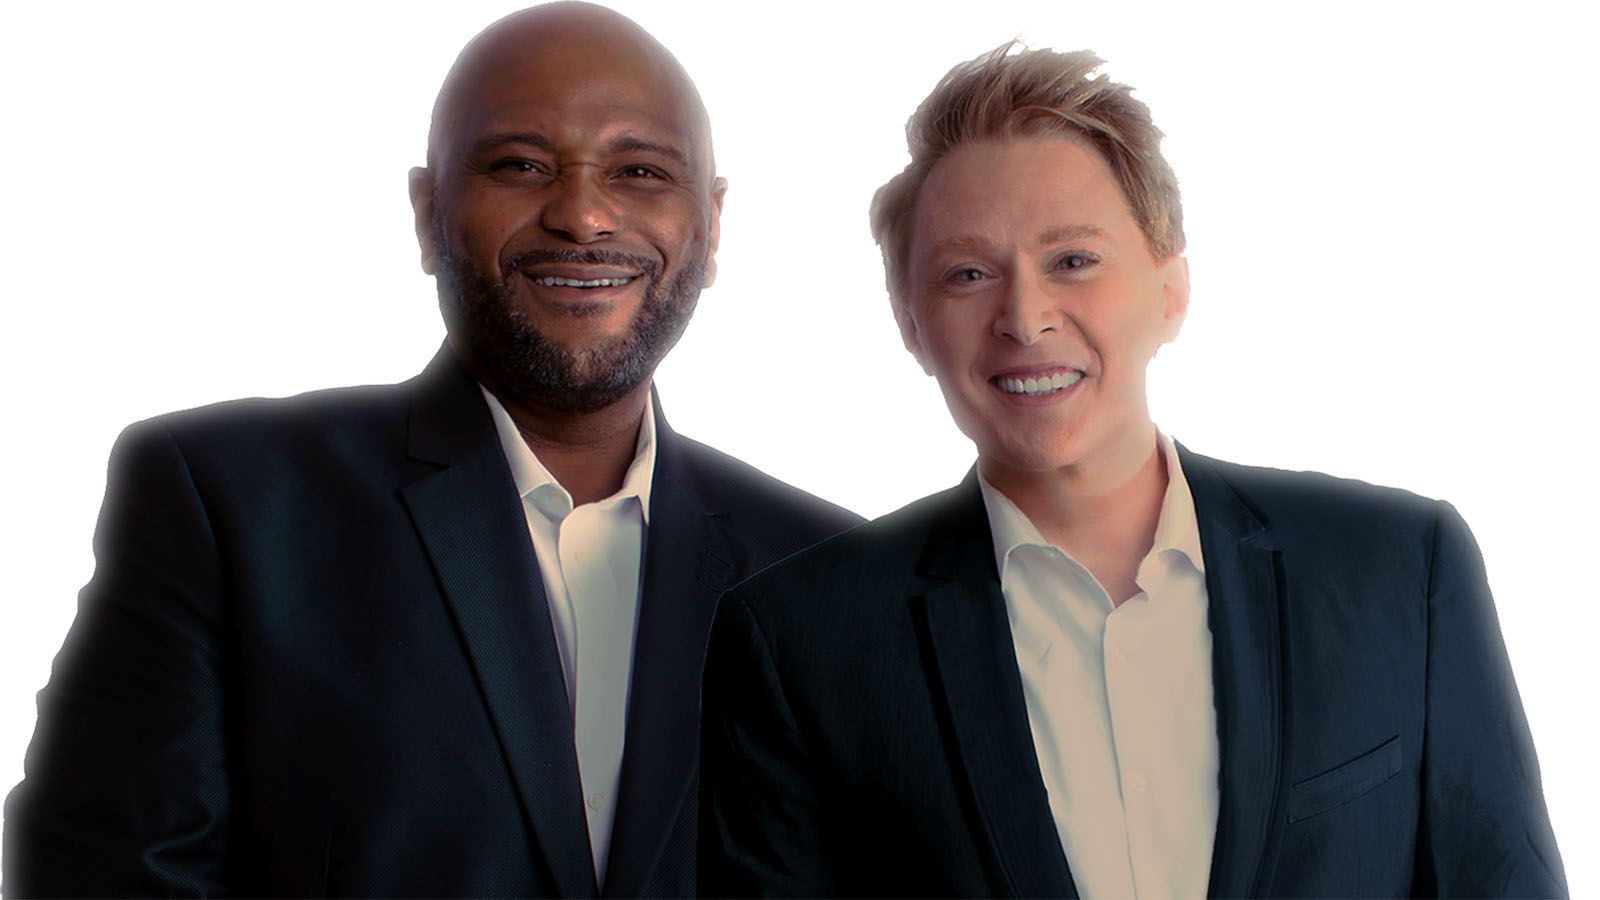 Ruben Studdard and Clay Aiken will be at Honeywell Center on May 13.